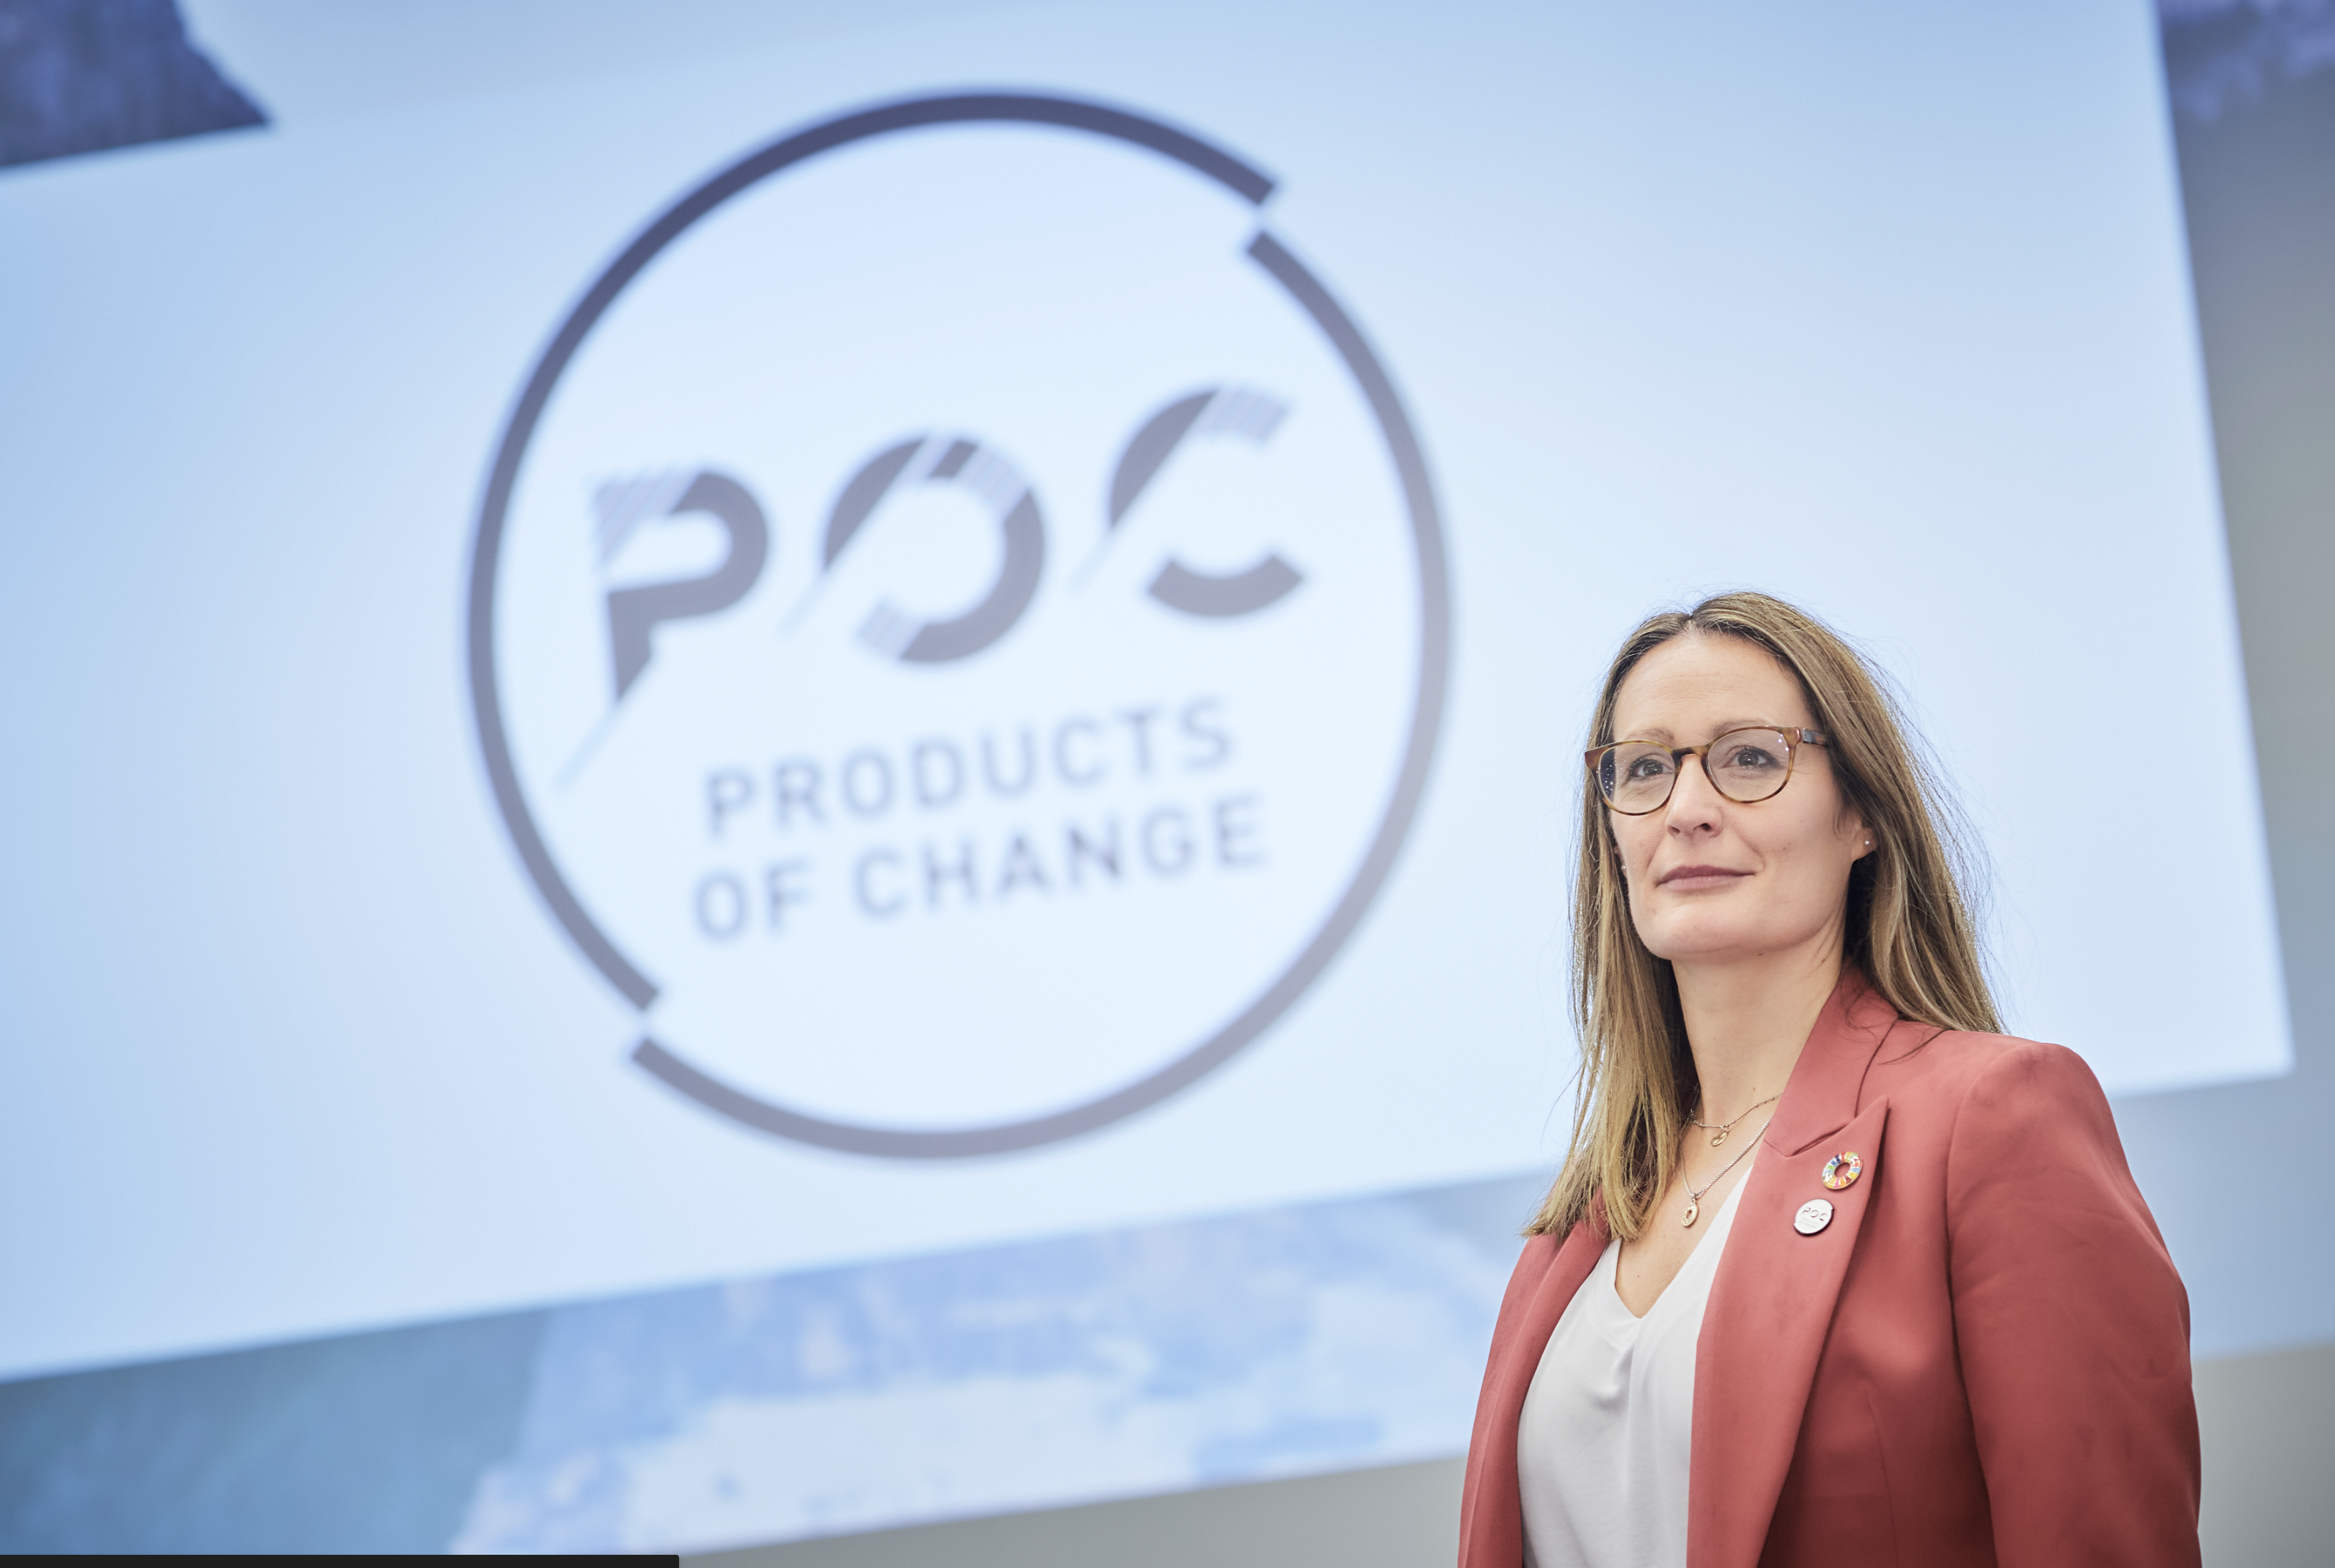 INTERVIEW: POC on Five Years of Impactful Change